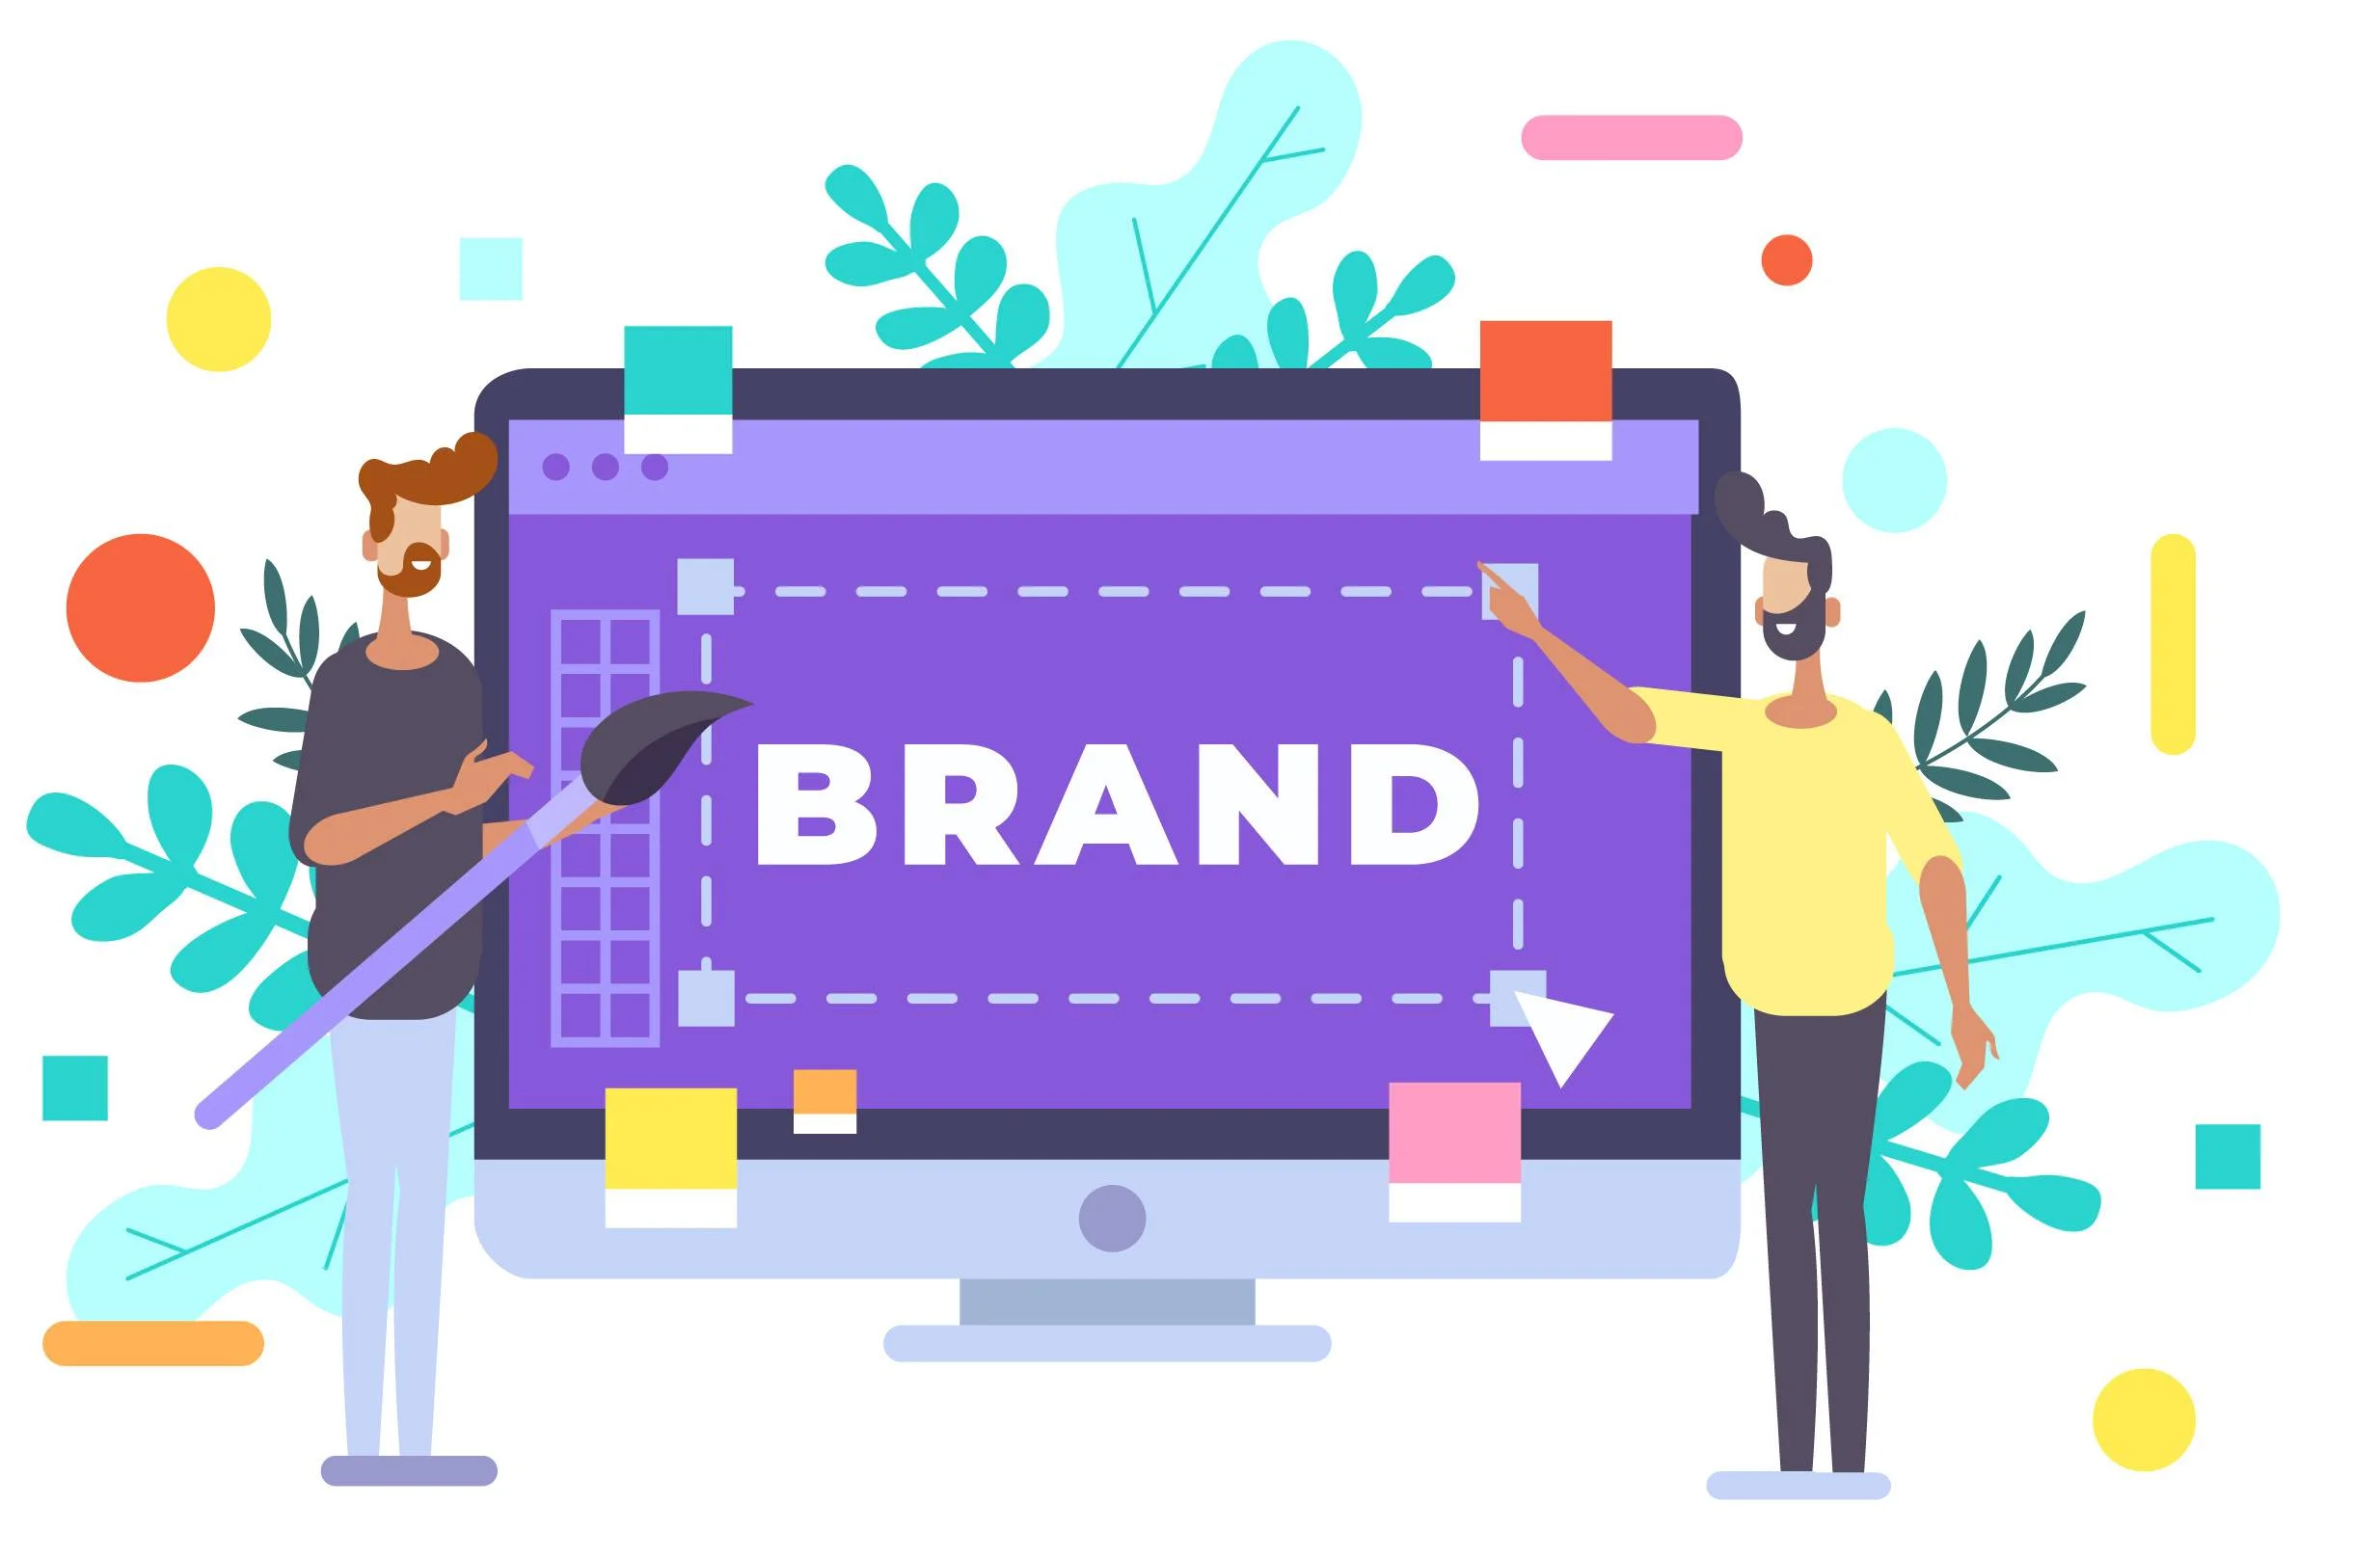 Making the audience aware of your brand